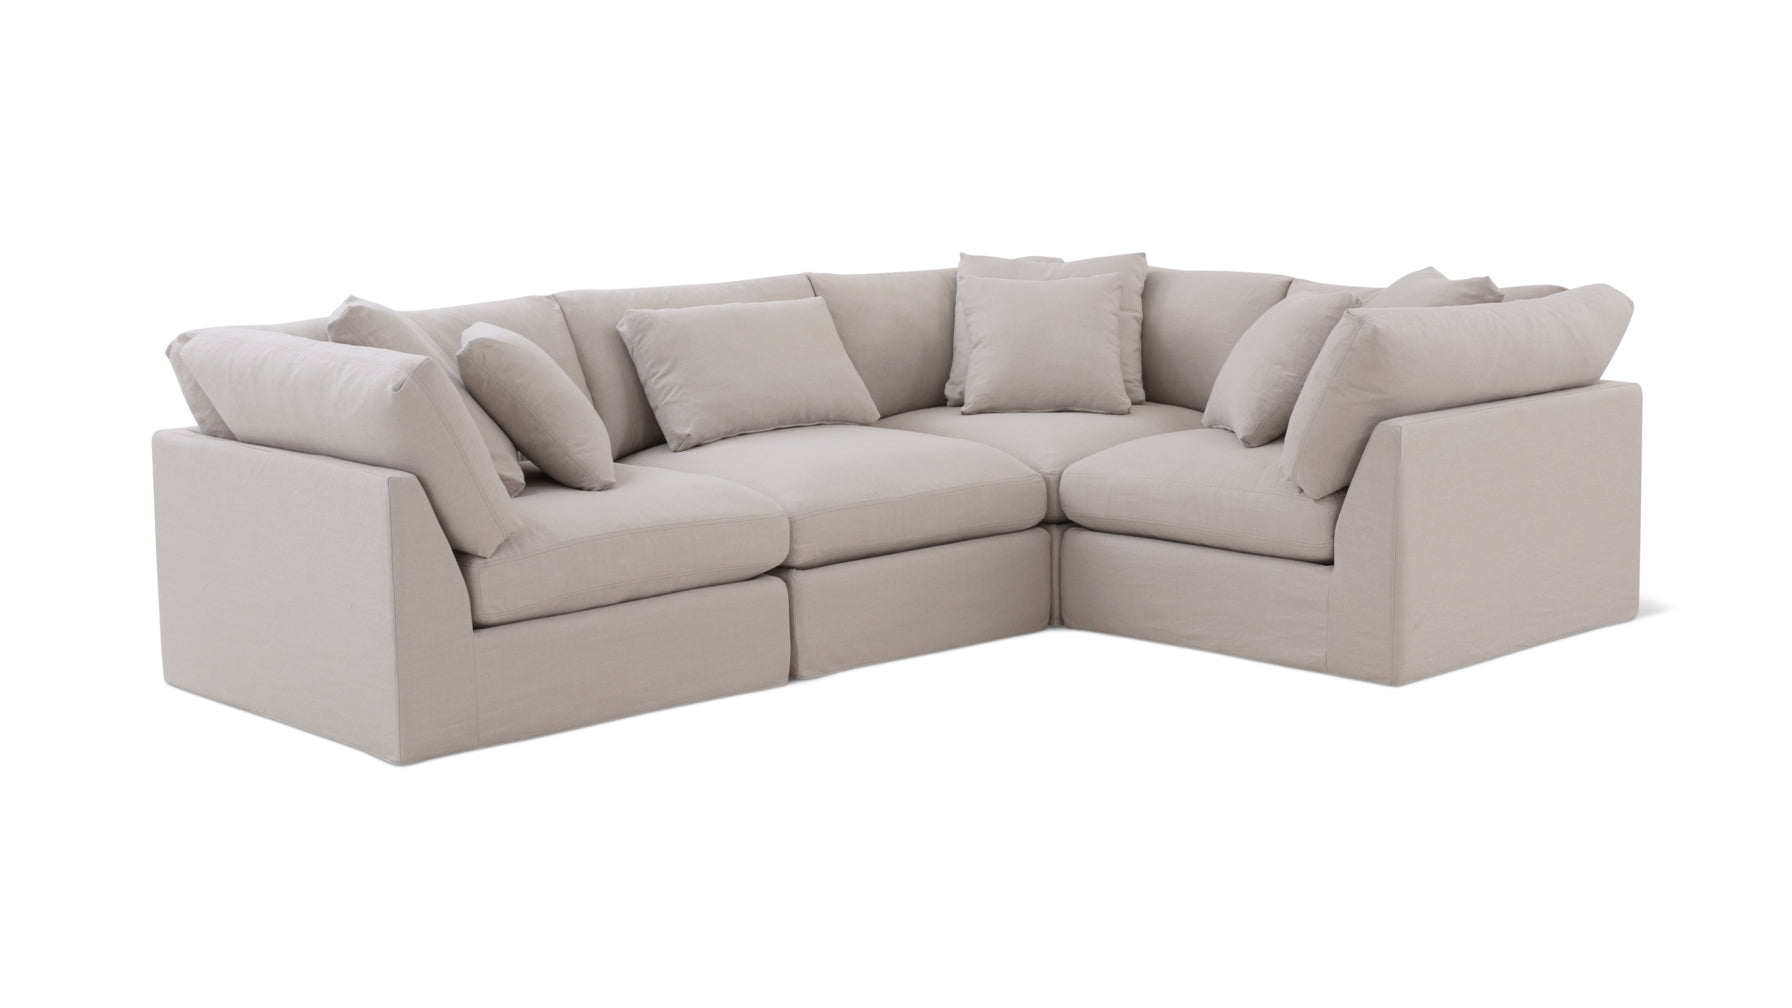 Get Together™ 4-Piece Modular Sectional Closed, Large, Clay - Image 2